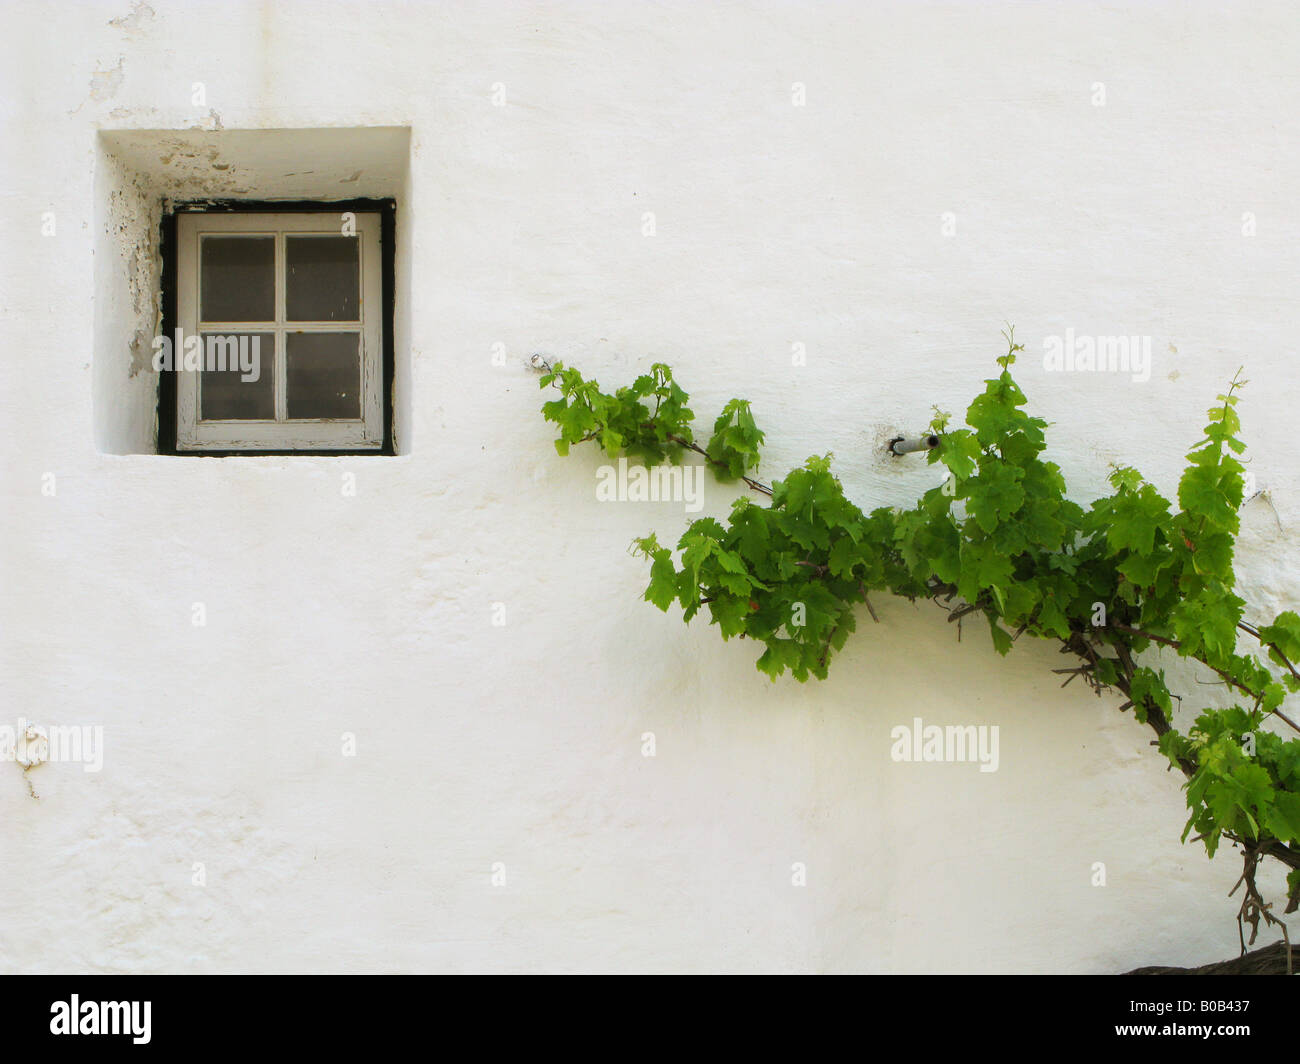 Grapevine growing on a white wall beside a small outhouse window on a farm near Mahon, Menorca, Spain Stock Photo